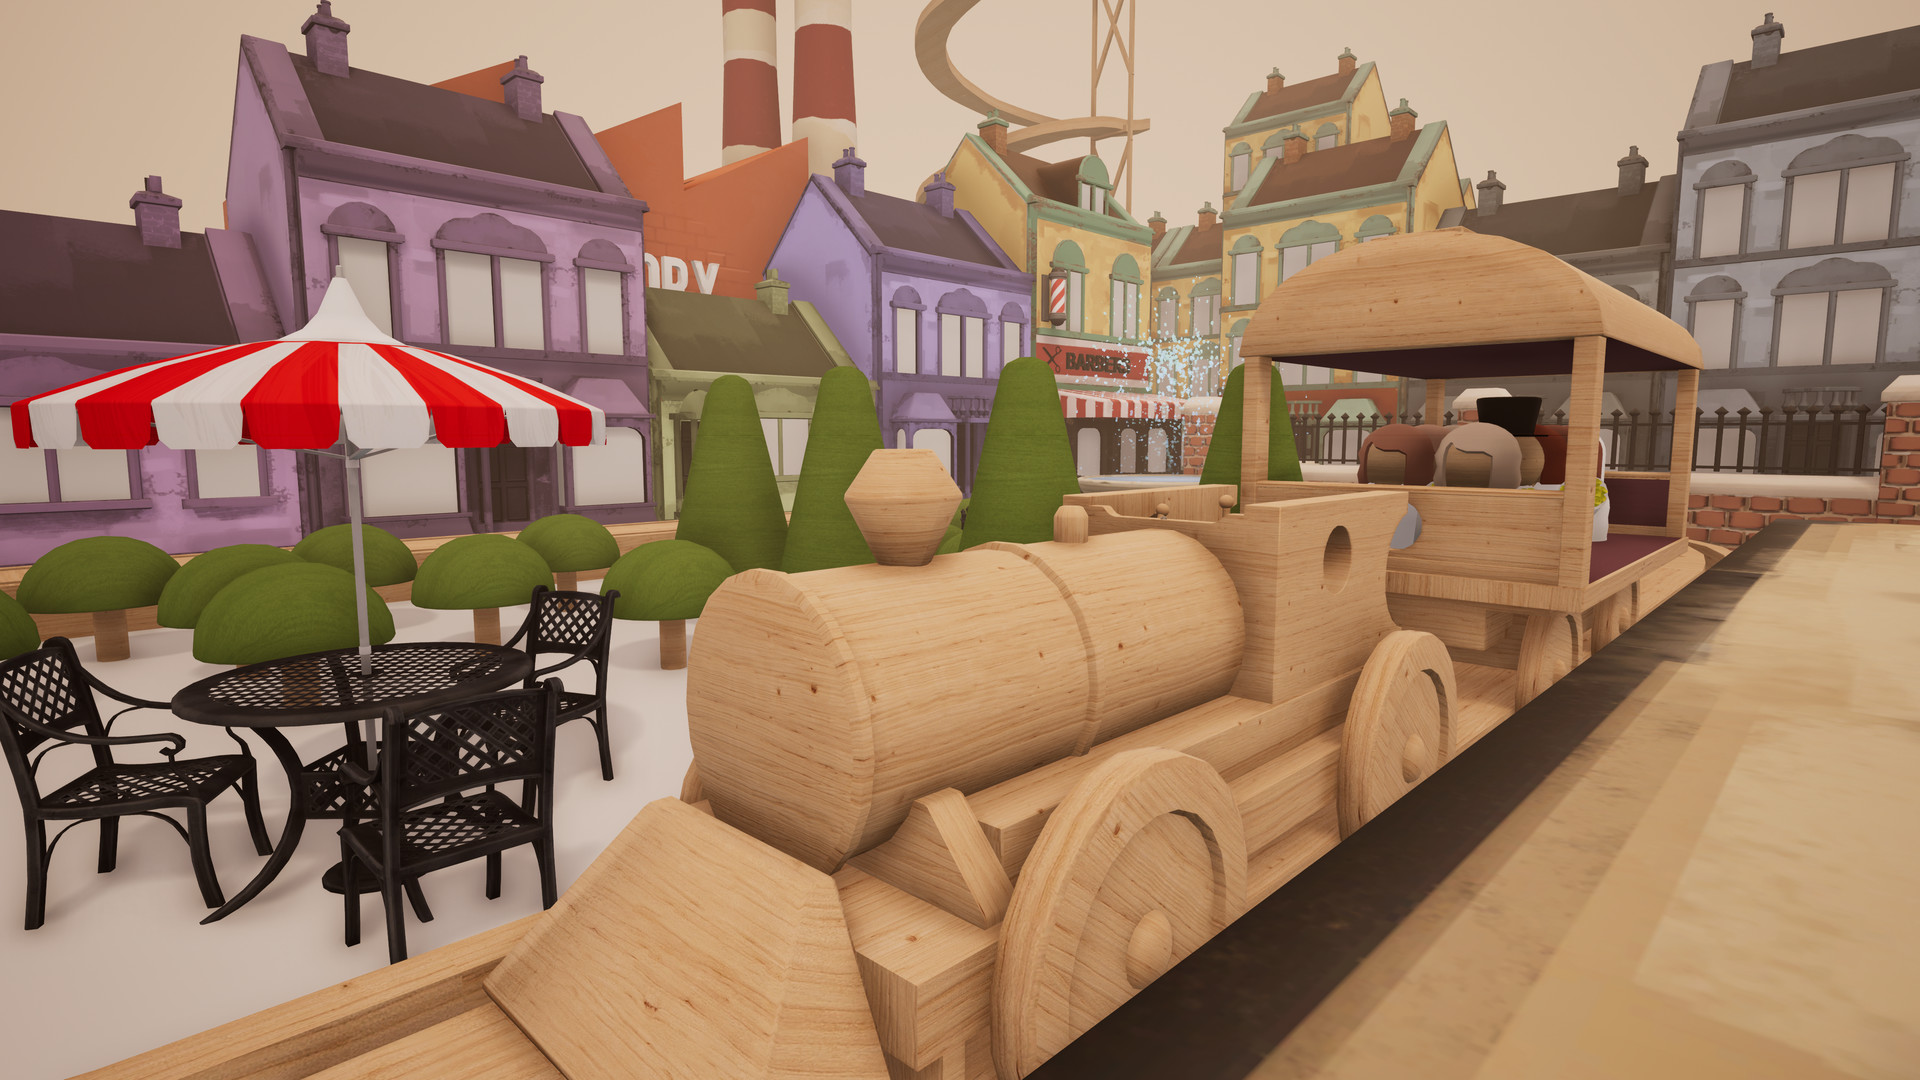 Tracks - The Family Friendly Open World Train Set Game Free Download